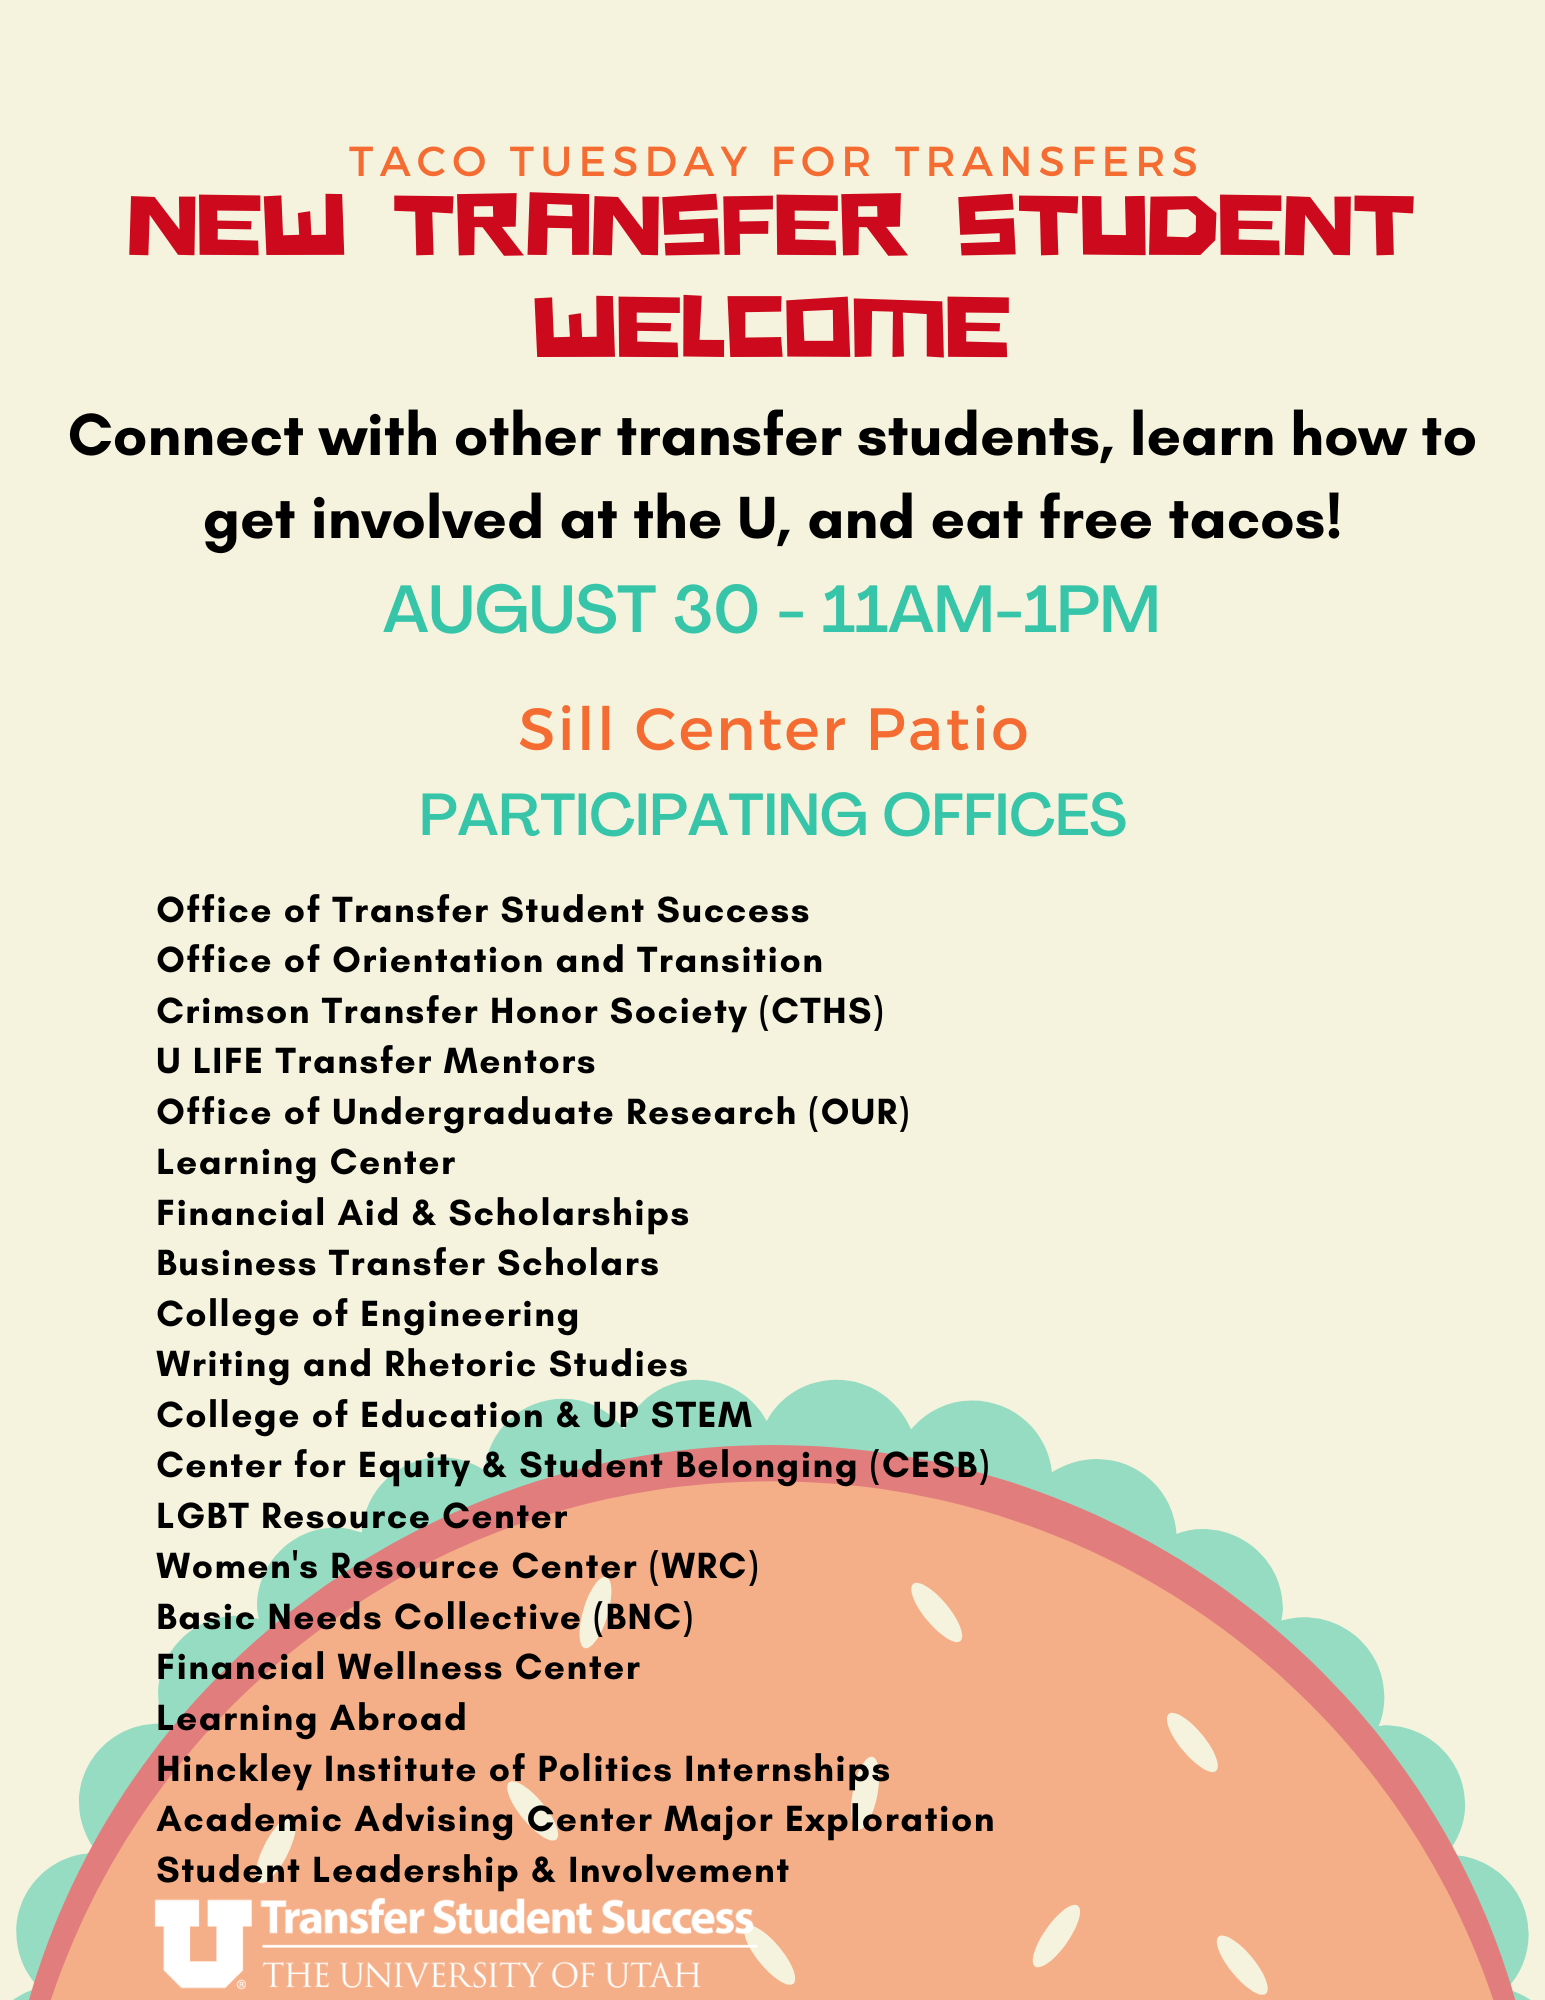 New Transfer Student Welcome